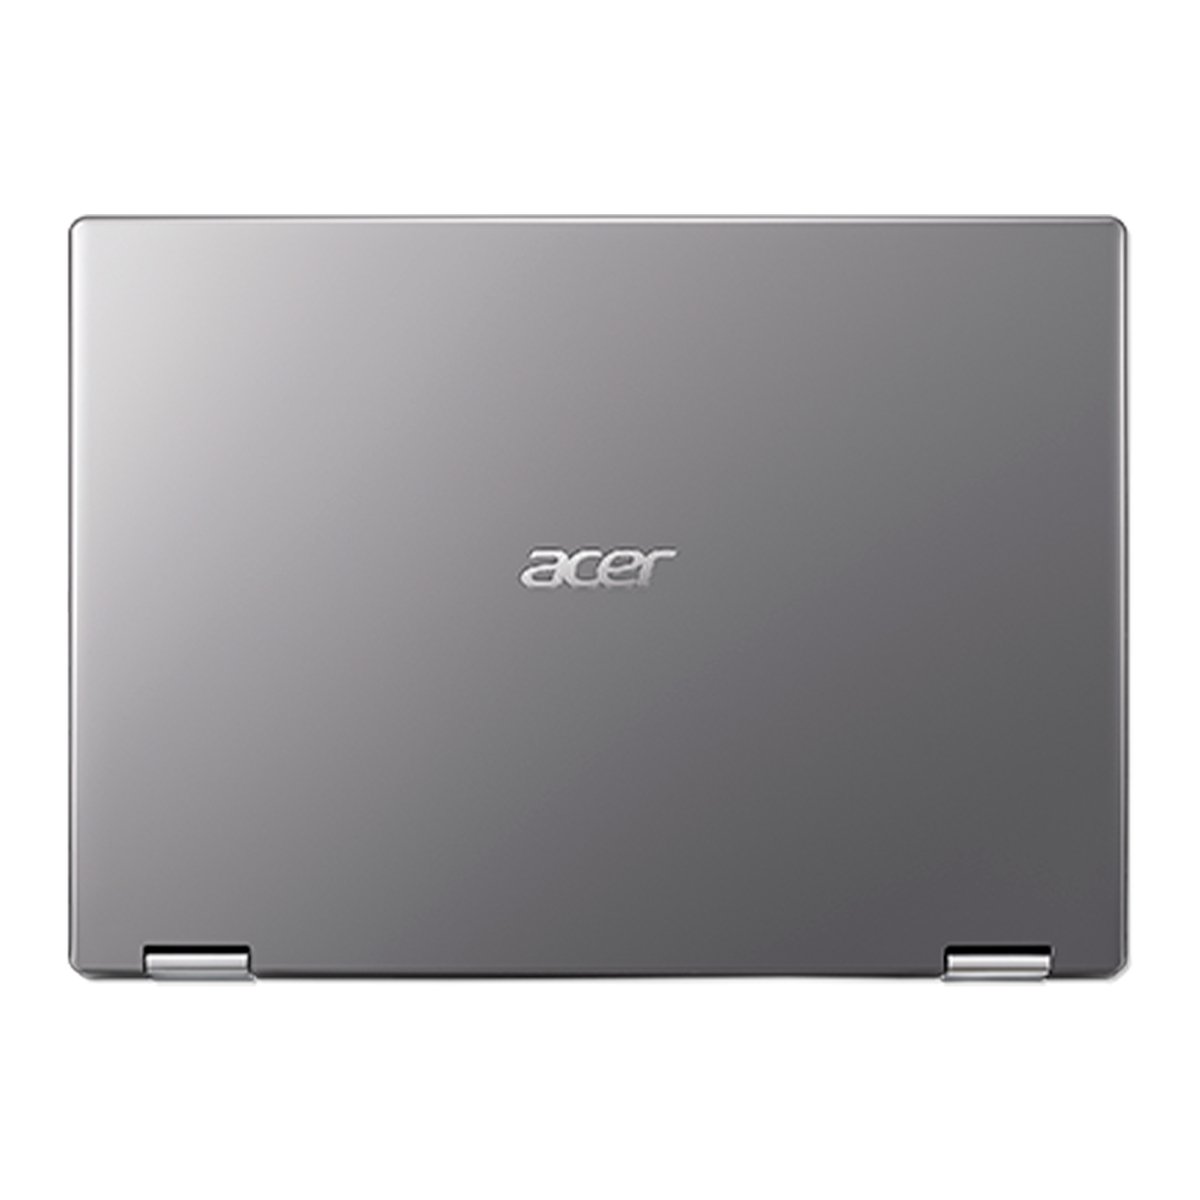 Acer 2 IN 1 Notebook Spin 3 NX.HQ7EM.00D,Core i5-1035G1,8GB RAM,512GB SSD,14.0"FHD IPS,Windows 10,Silver